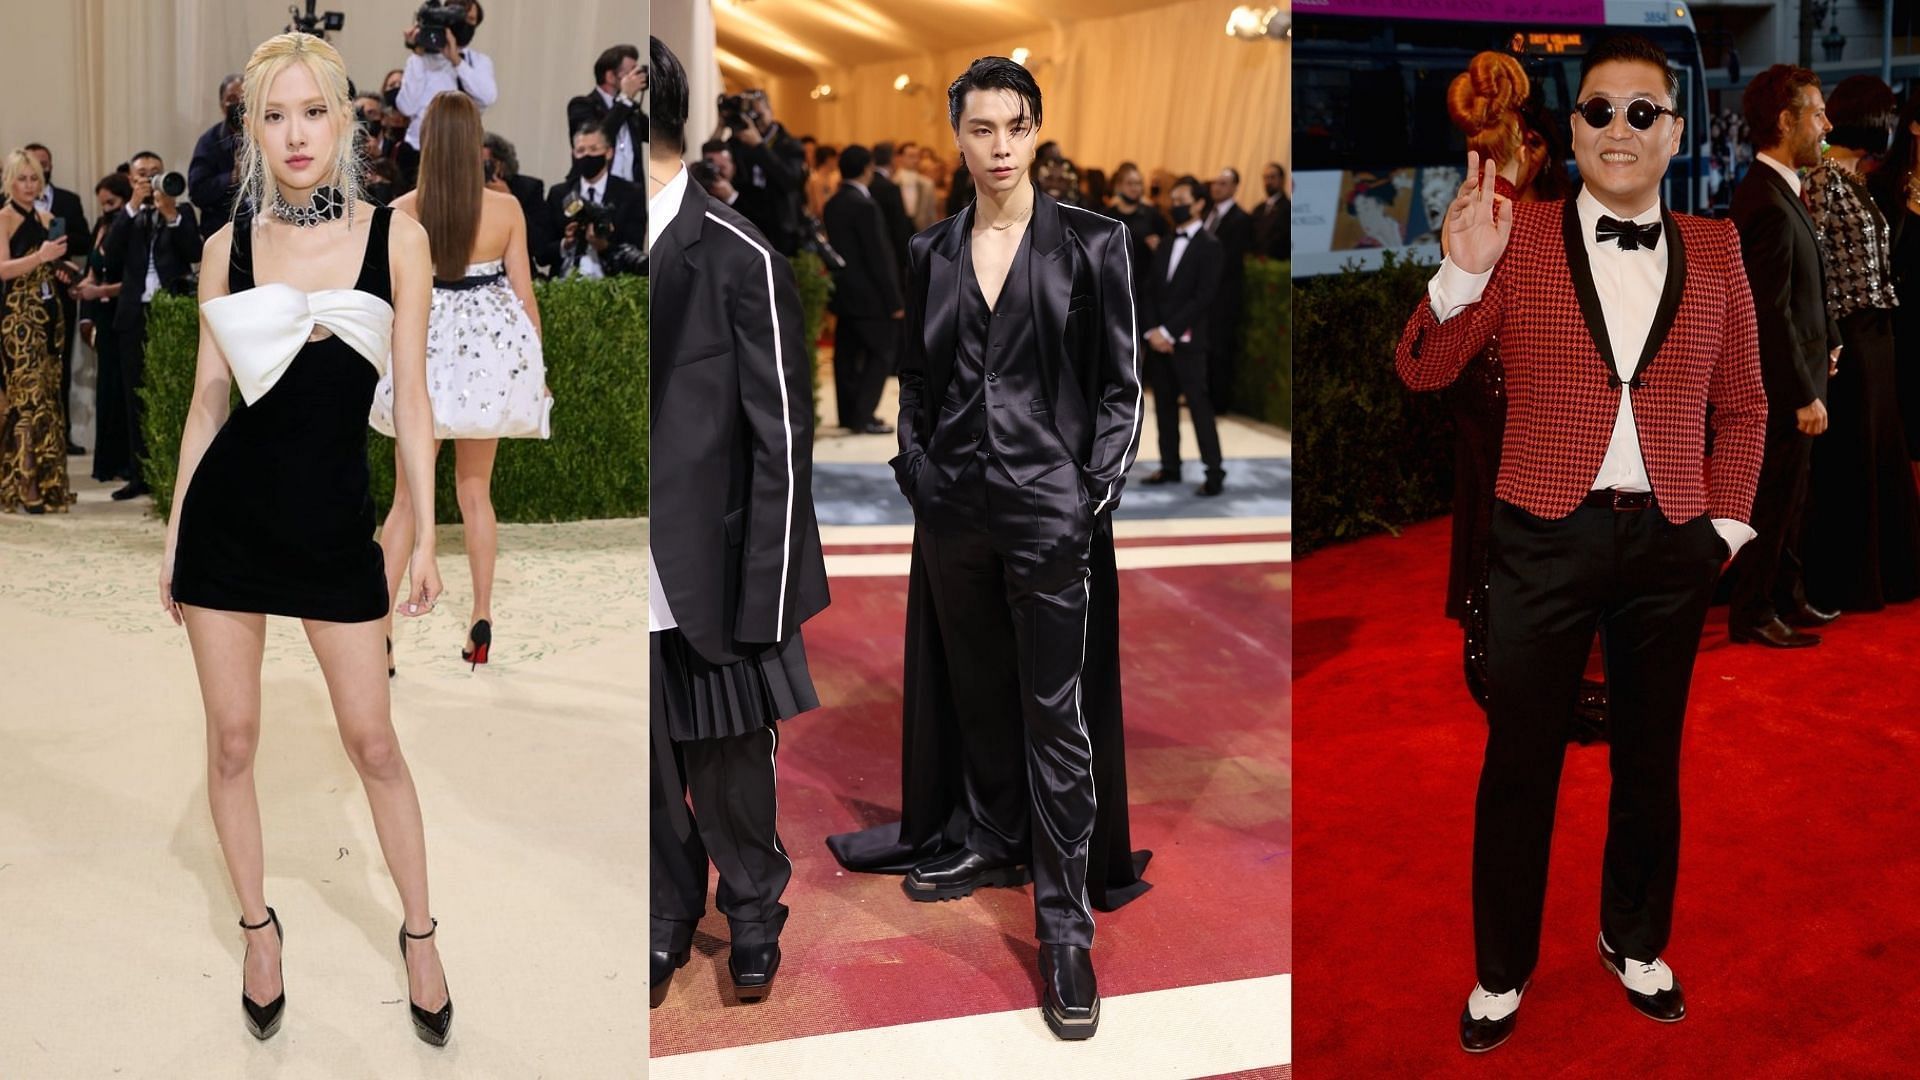 Kpop idols who have attended the Met Gala